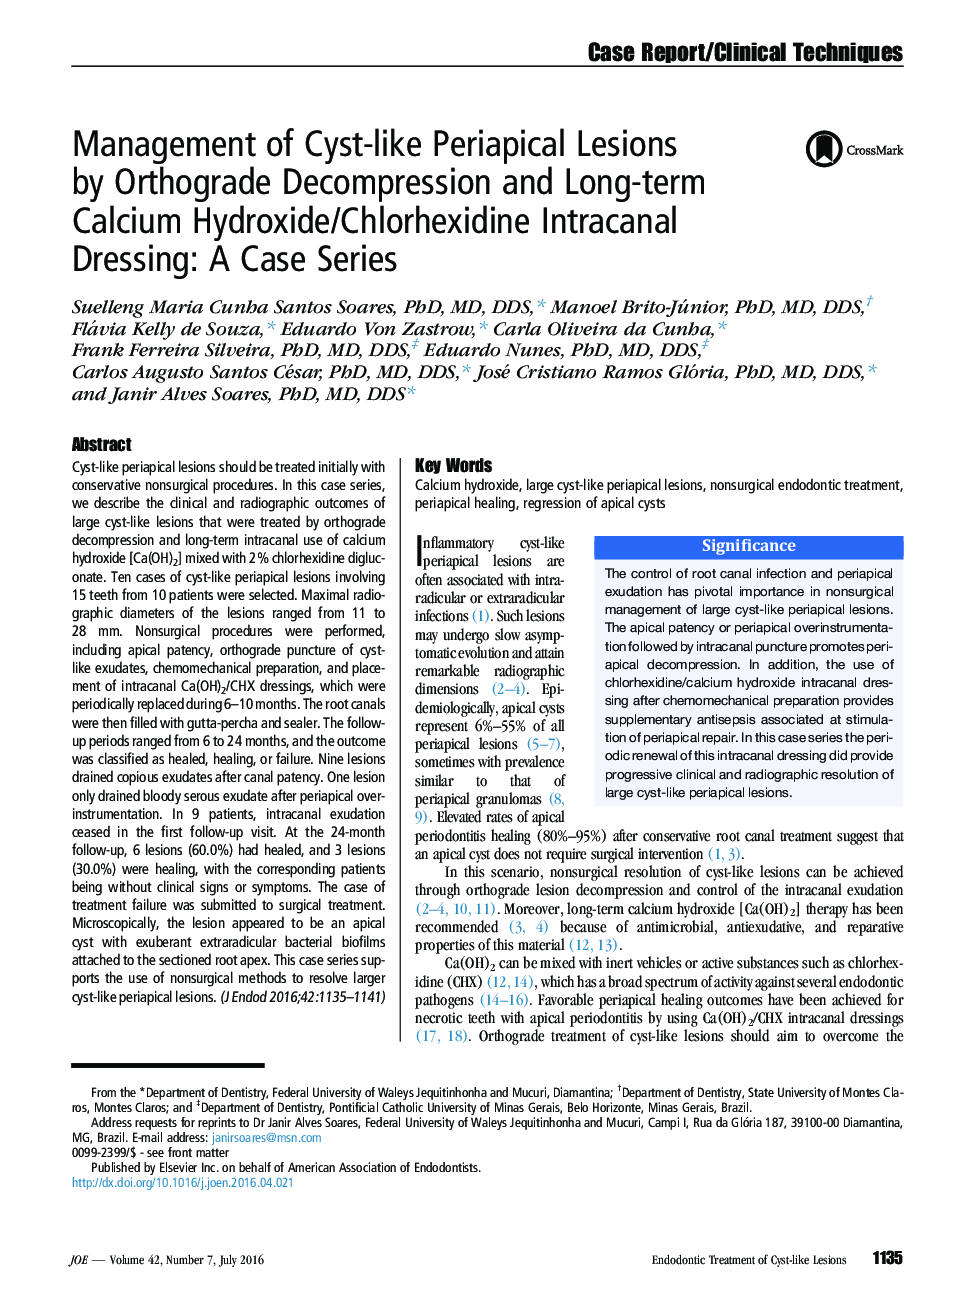 Management of Cyst-like Periapical Lesions by Orthograde Decompression and Long-term Calcium Hydroxide/Chlorhexidine Intracanal Dressing: A Case Series